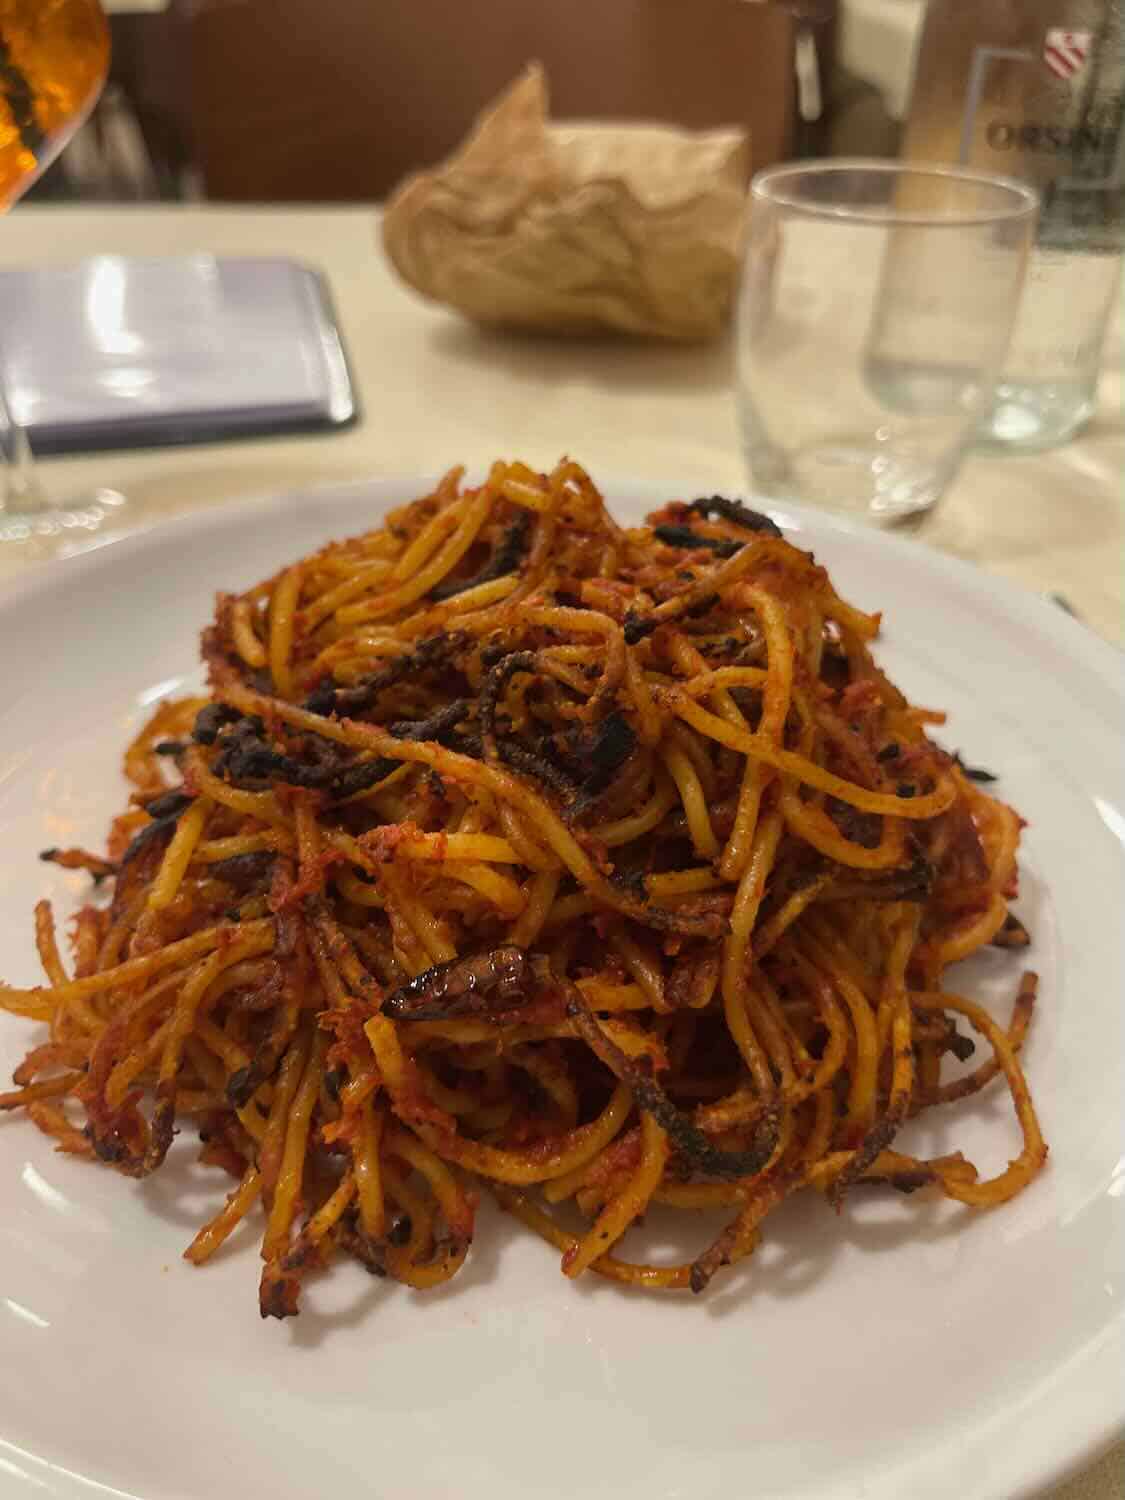 A plate of Spaghetti all'Assassina, a traditional dish from Bari, Italy. The pasta is crispy and burnt, covered in a rich tomato sauce with garlic and spicy red peppers.